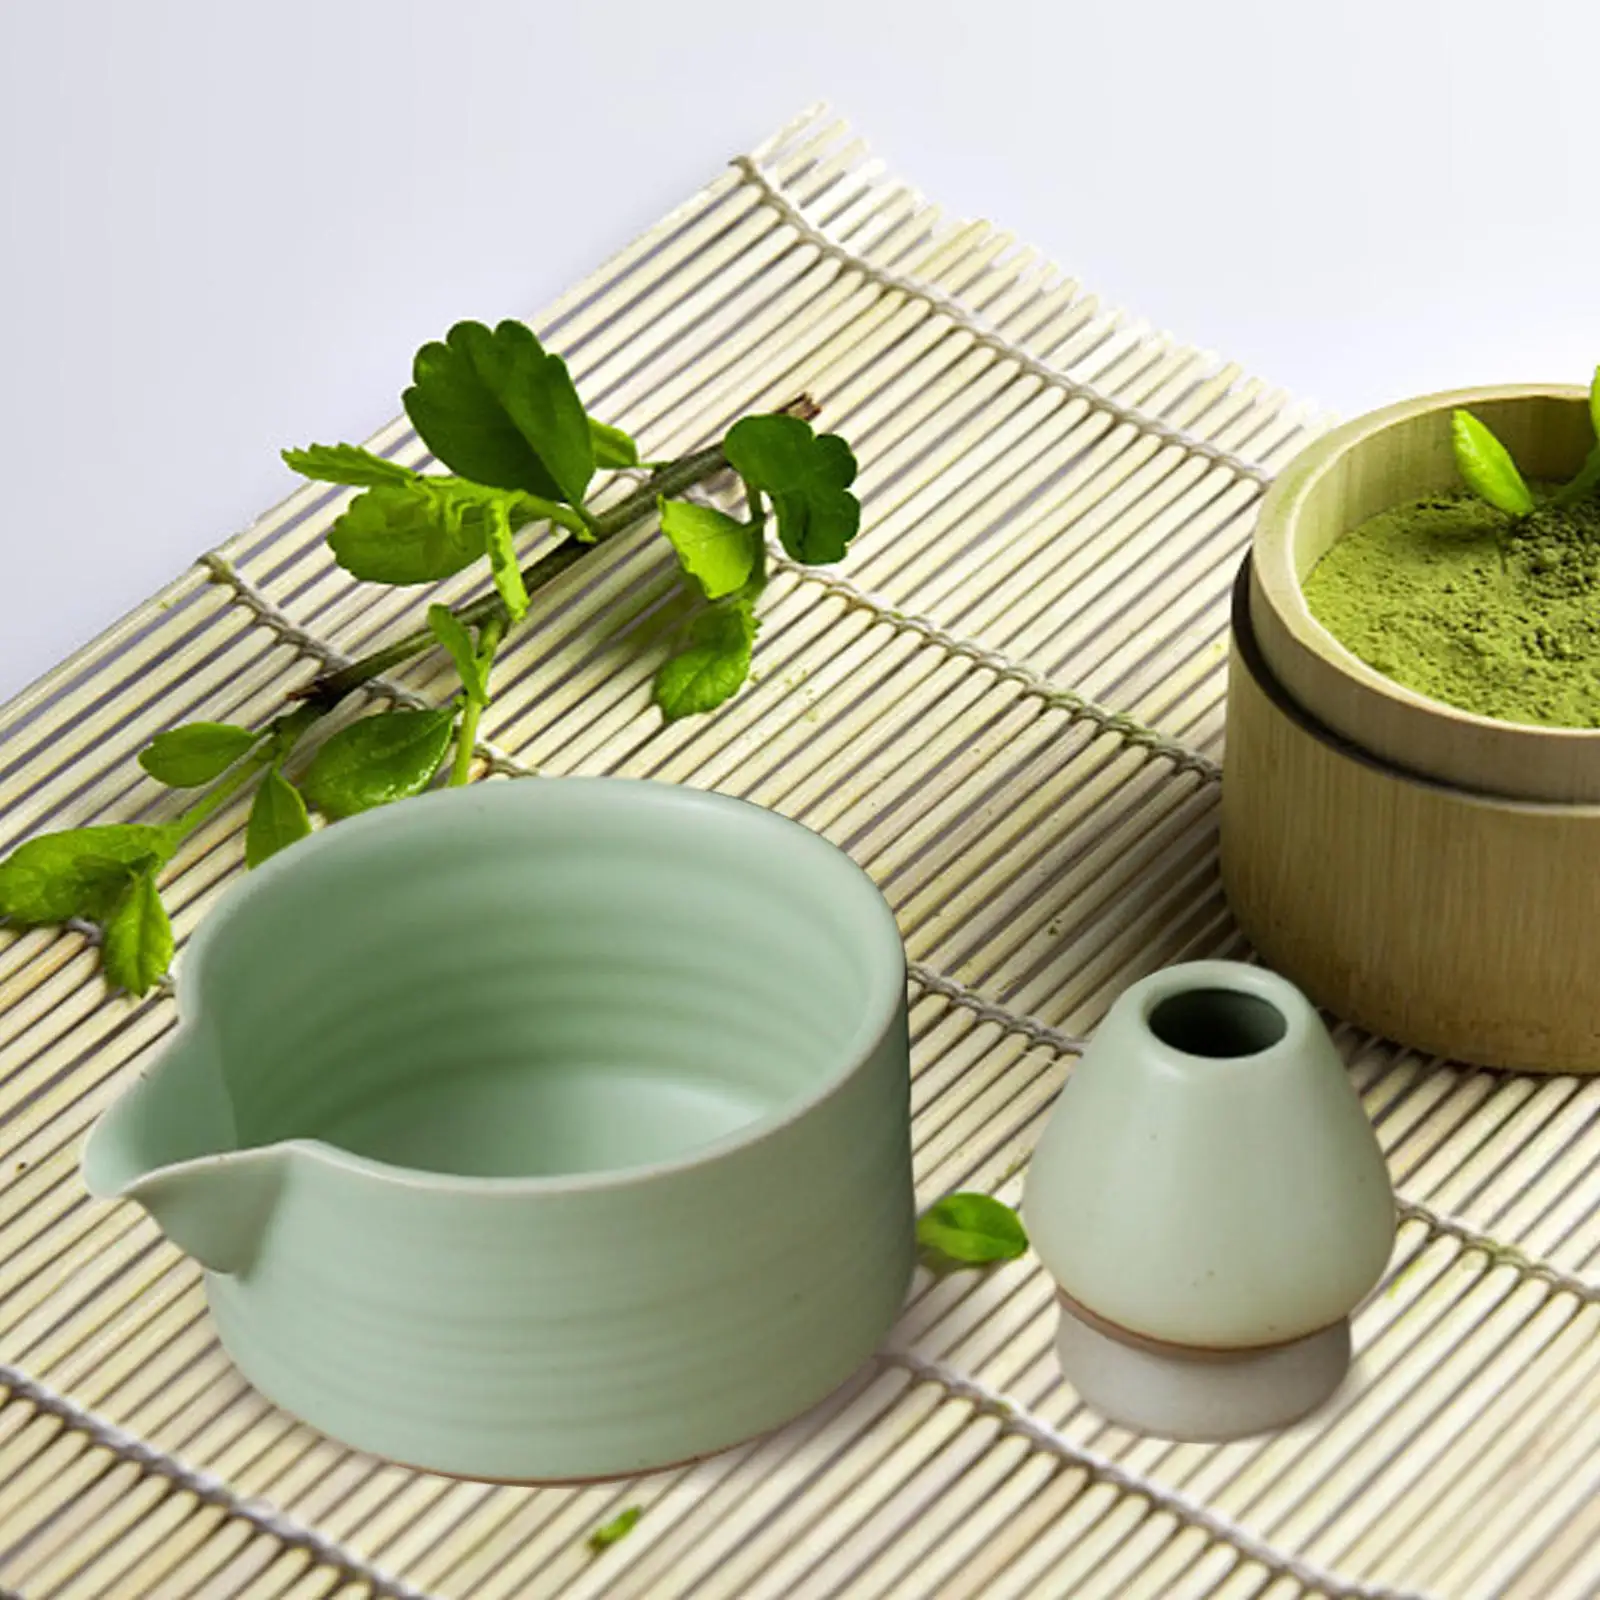 2x Matcha Ceremony Accessory with Whisk Holder Matcha Ceramic Bowl Matcha Bowl for Tea Lovers Beginner Friends Gifts